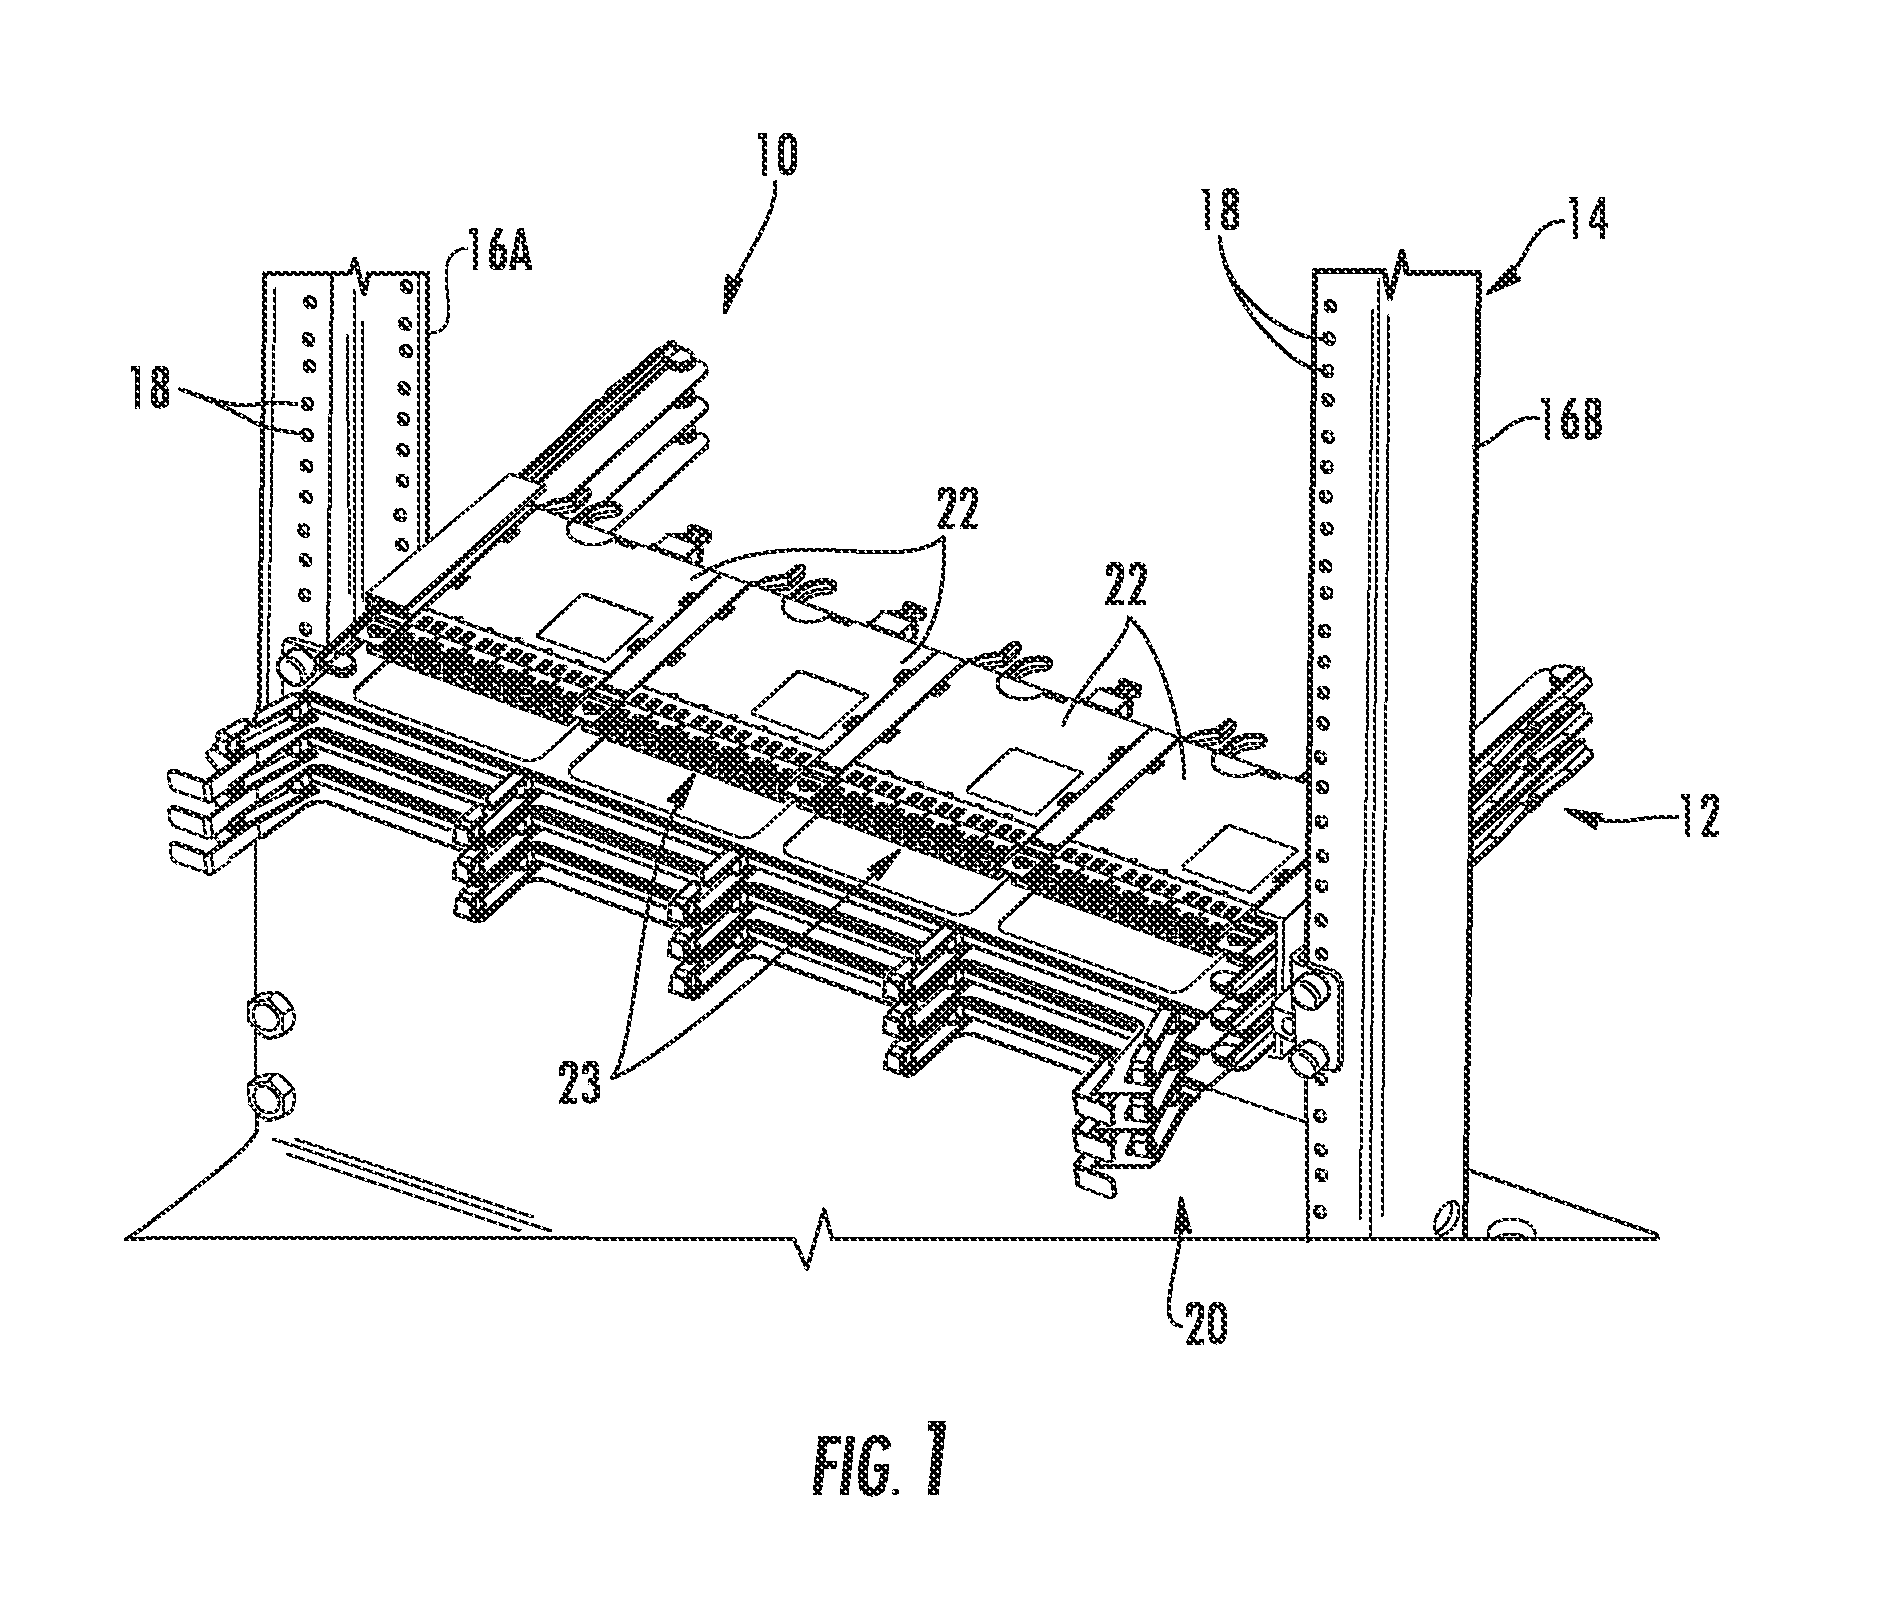 High Density and Bandwidth Fiber Optic Apparatuses and Related Equipment and Methods